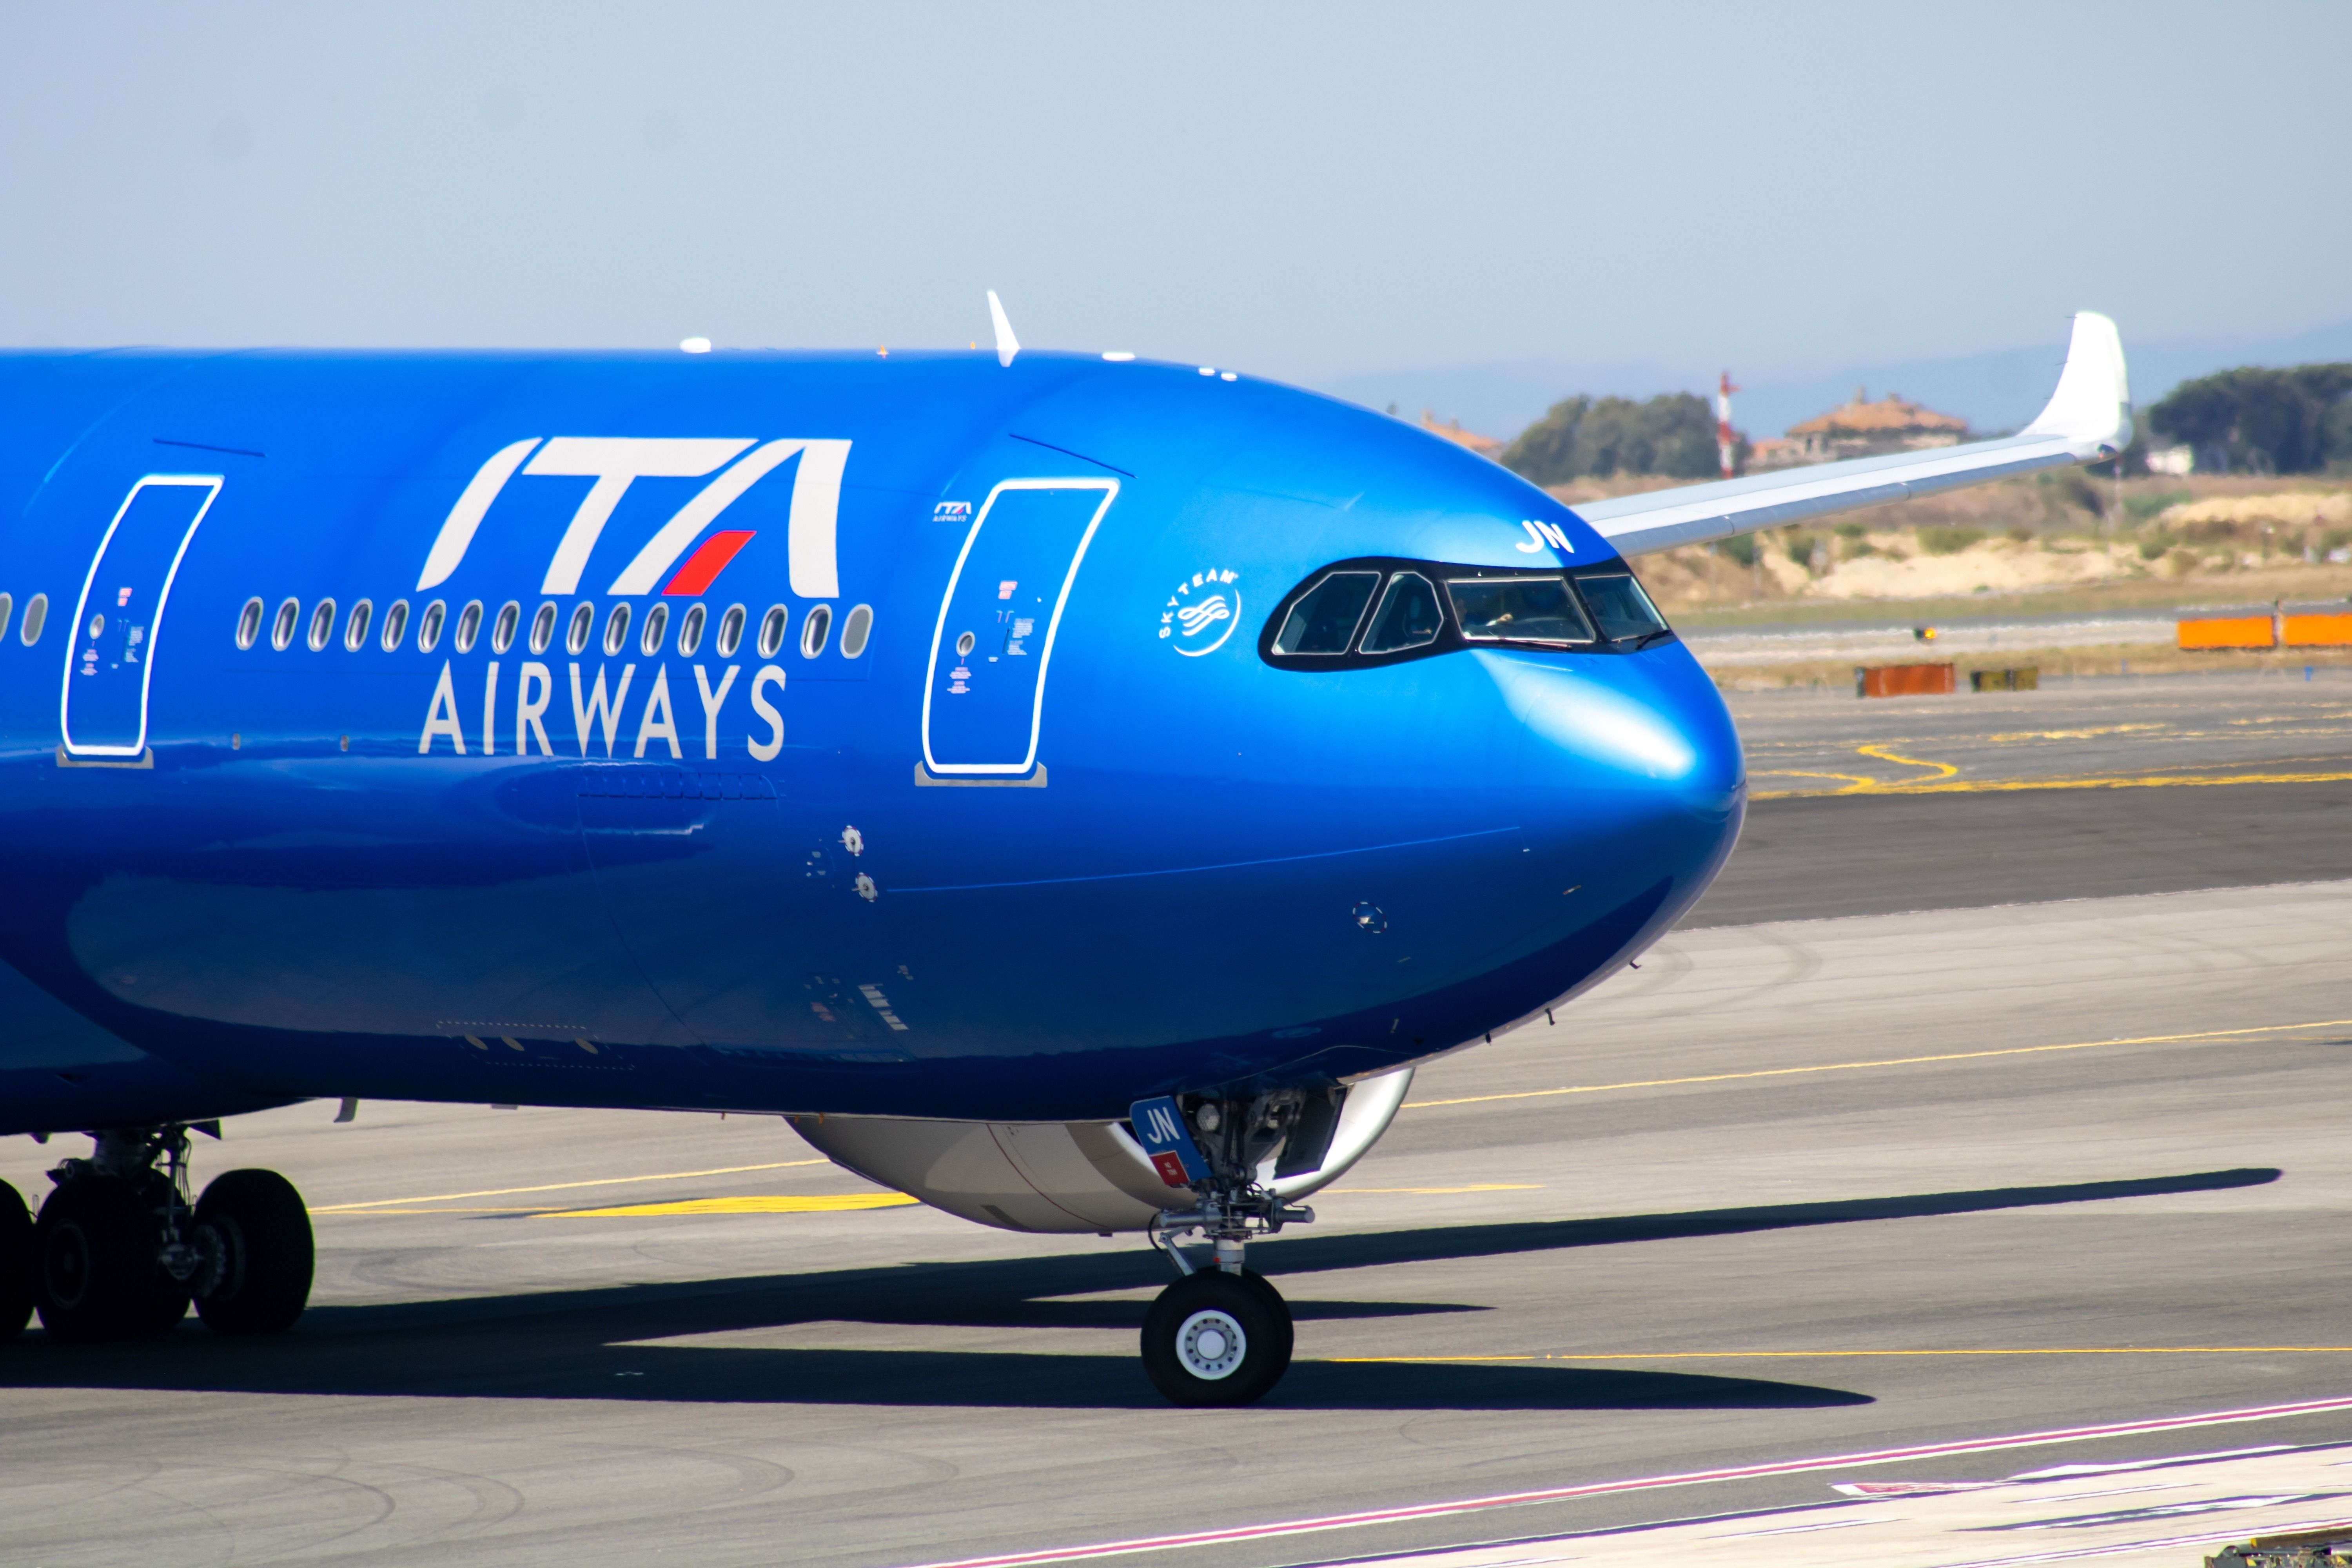 An ITA Airways Airbus A330neo on an airport apron.